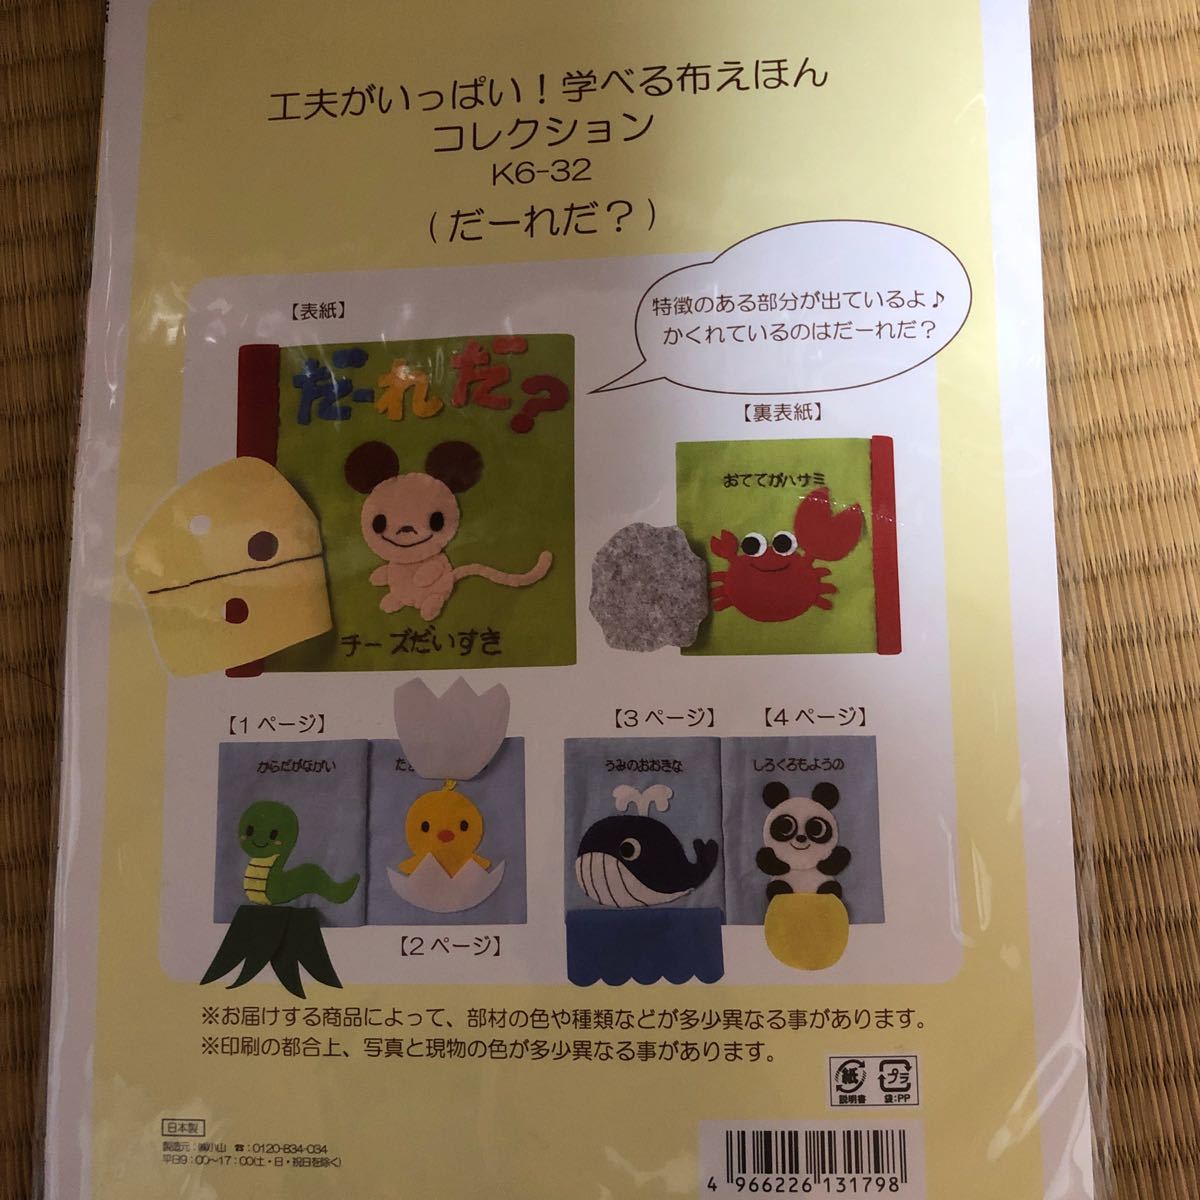 GINGER掲載商品】 布えほん キット だーれだ？ クラフト/布製品 - fdctheclub.com